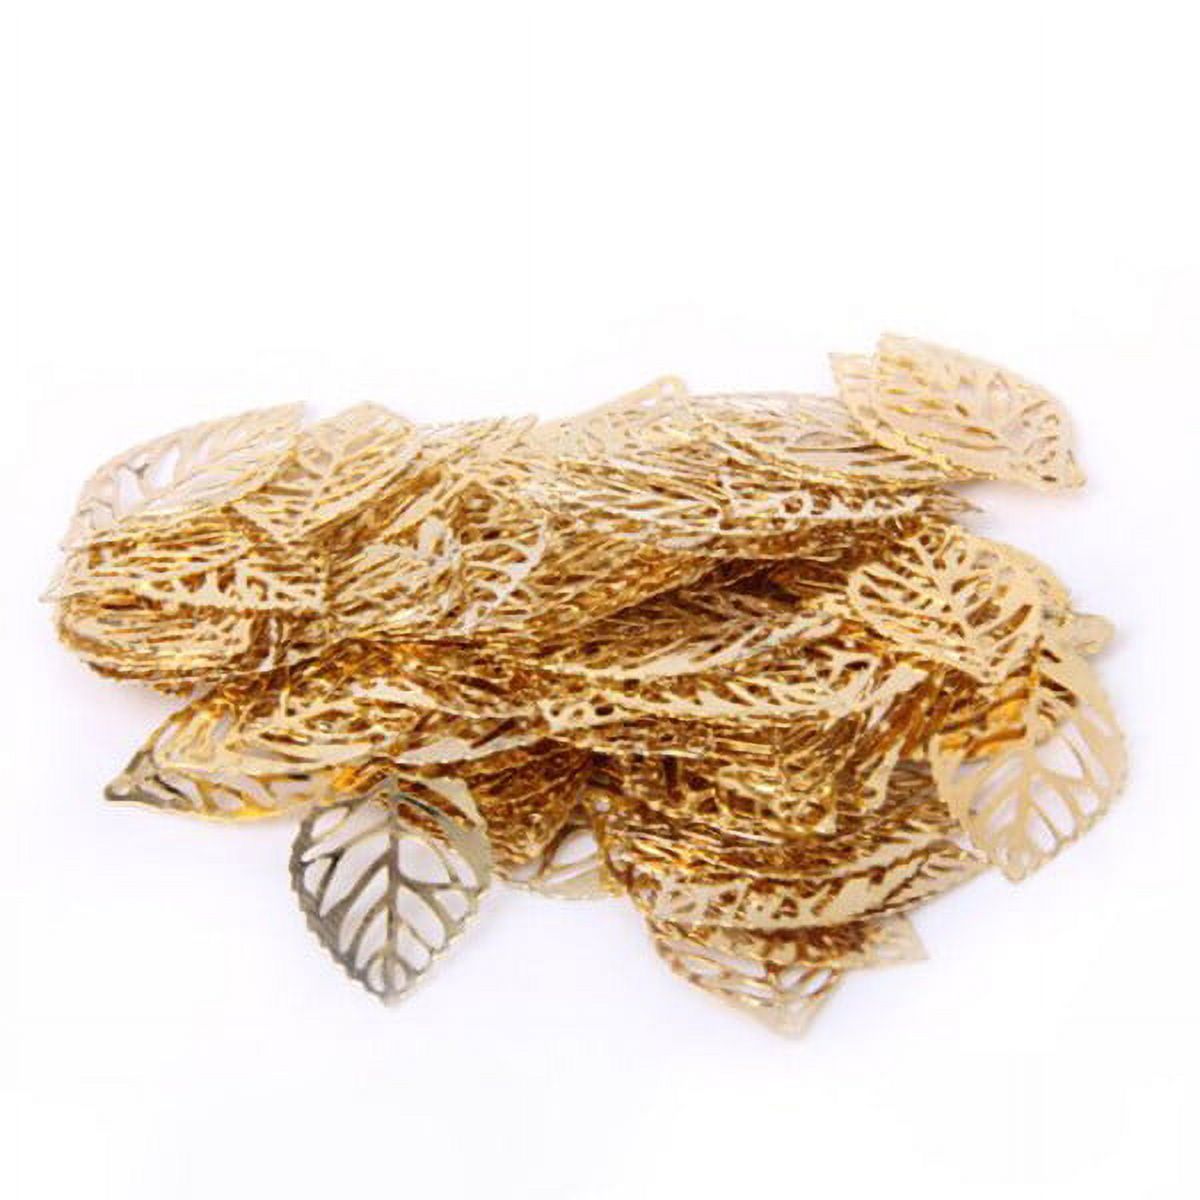 Leaf Tree Charms Jewelry Making Gold Leaves Metal Fall Crafts Embellishments Hollow Pierced Diy Alloy Decor Charm - image 4 of 5